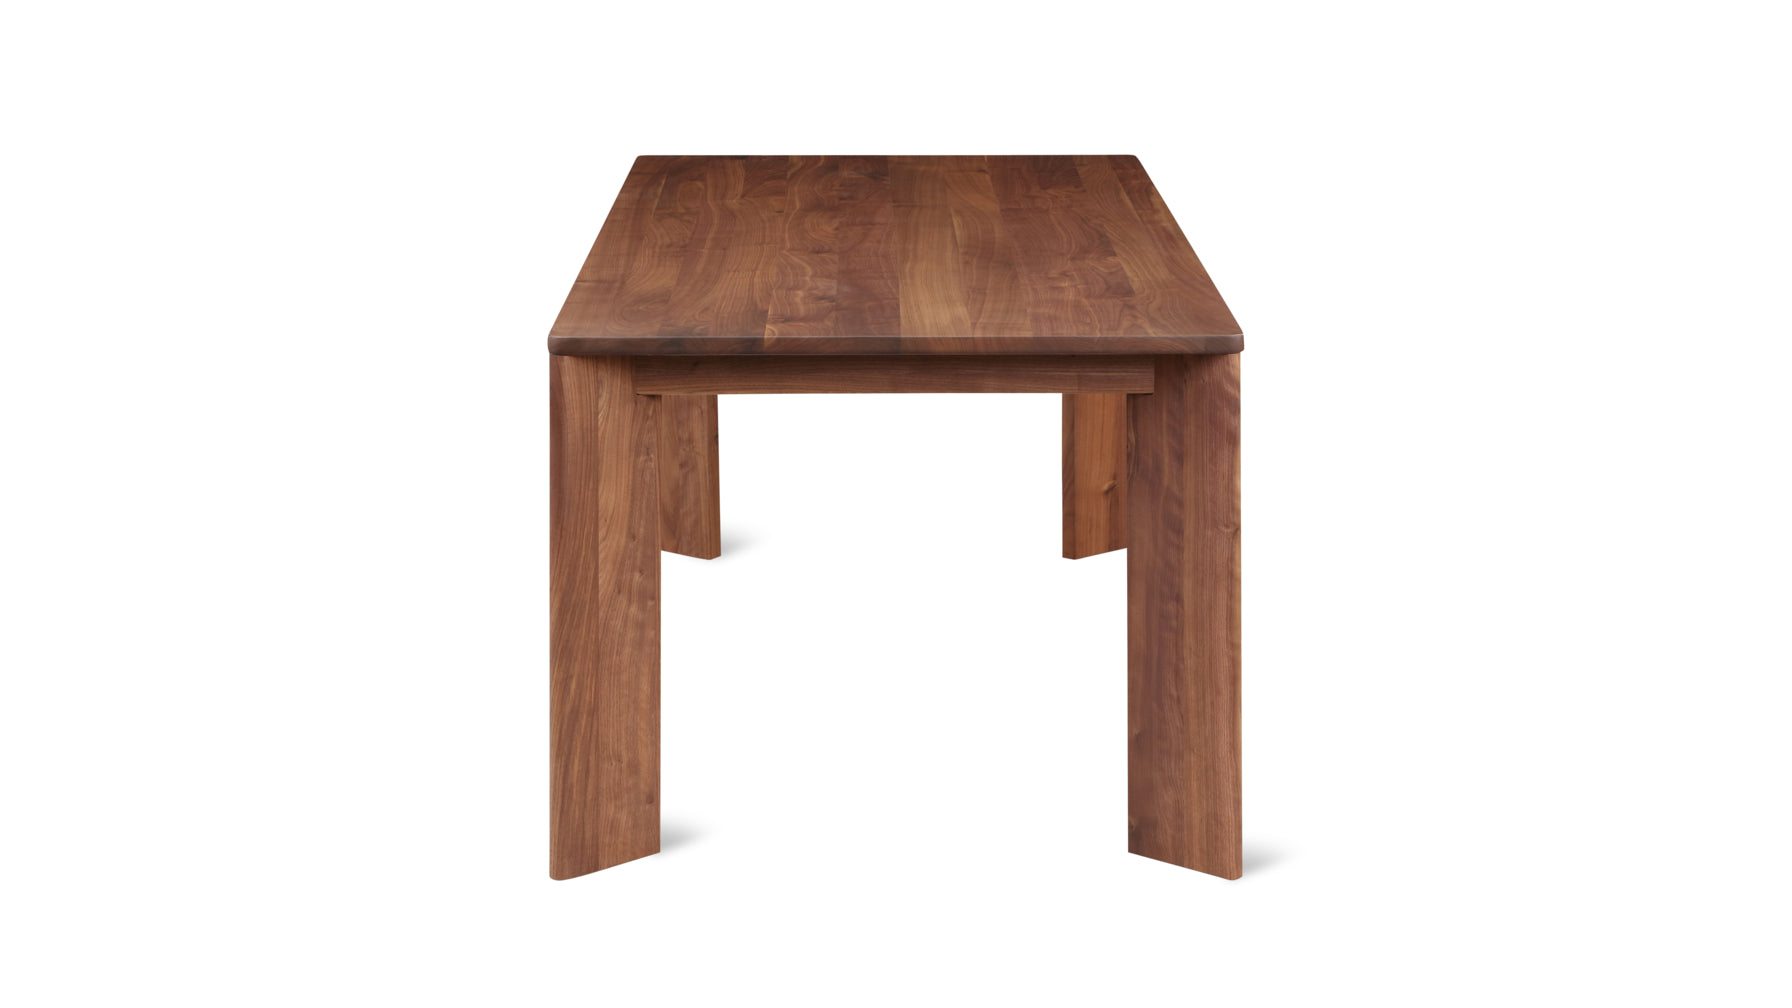 Frame Dining Table, Seats 4-6 People, American Walnut - Image 3